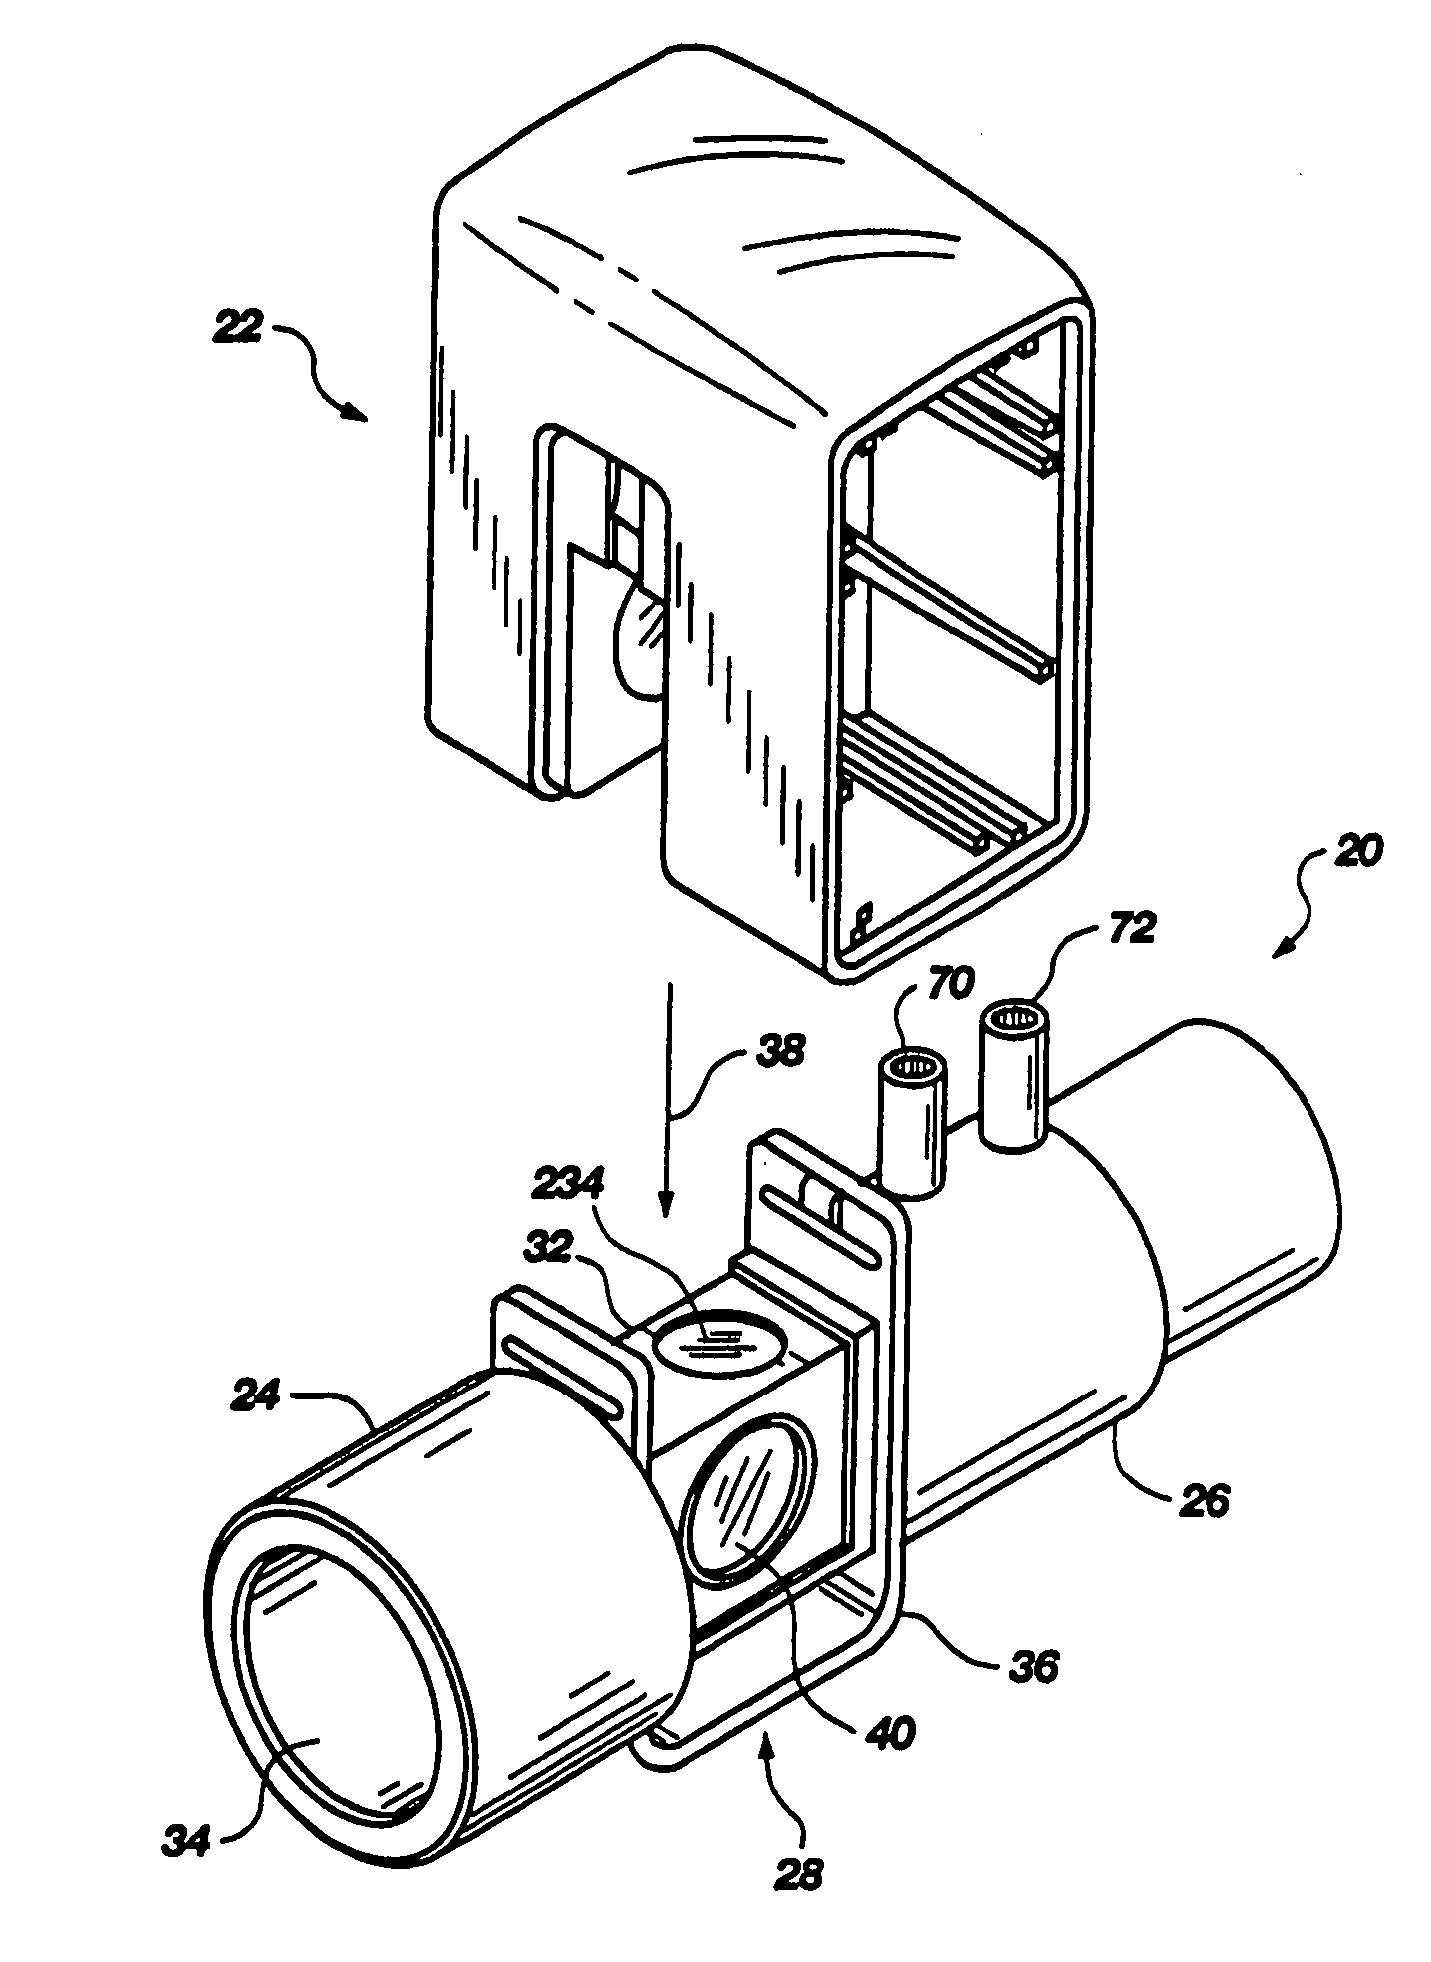 Metabolic measurements system including a multiple function airway adapter